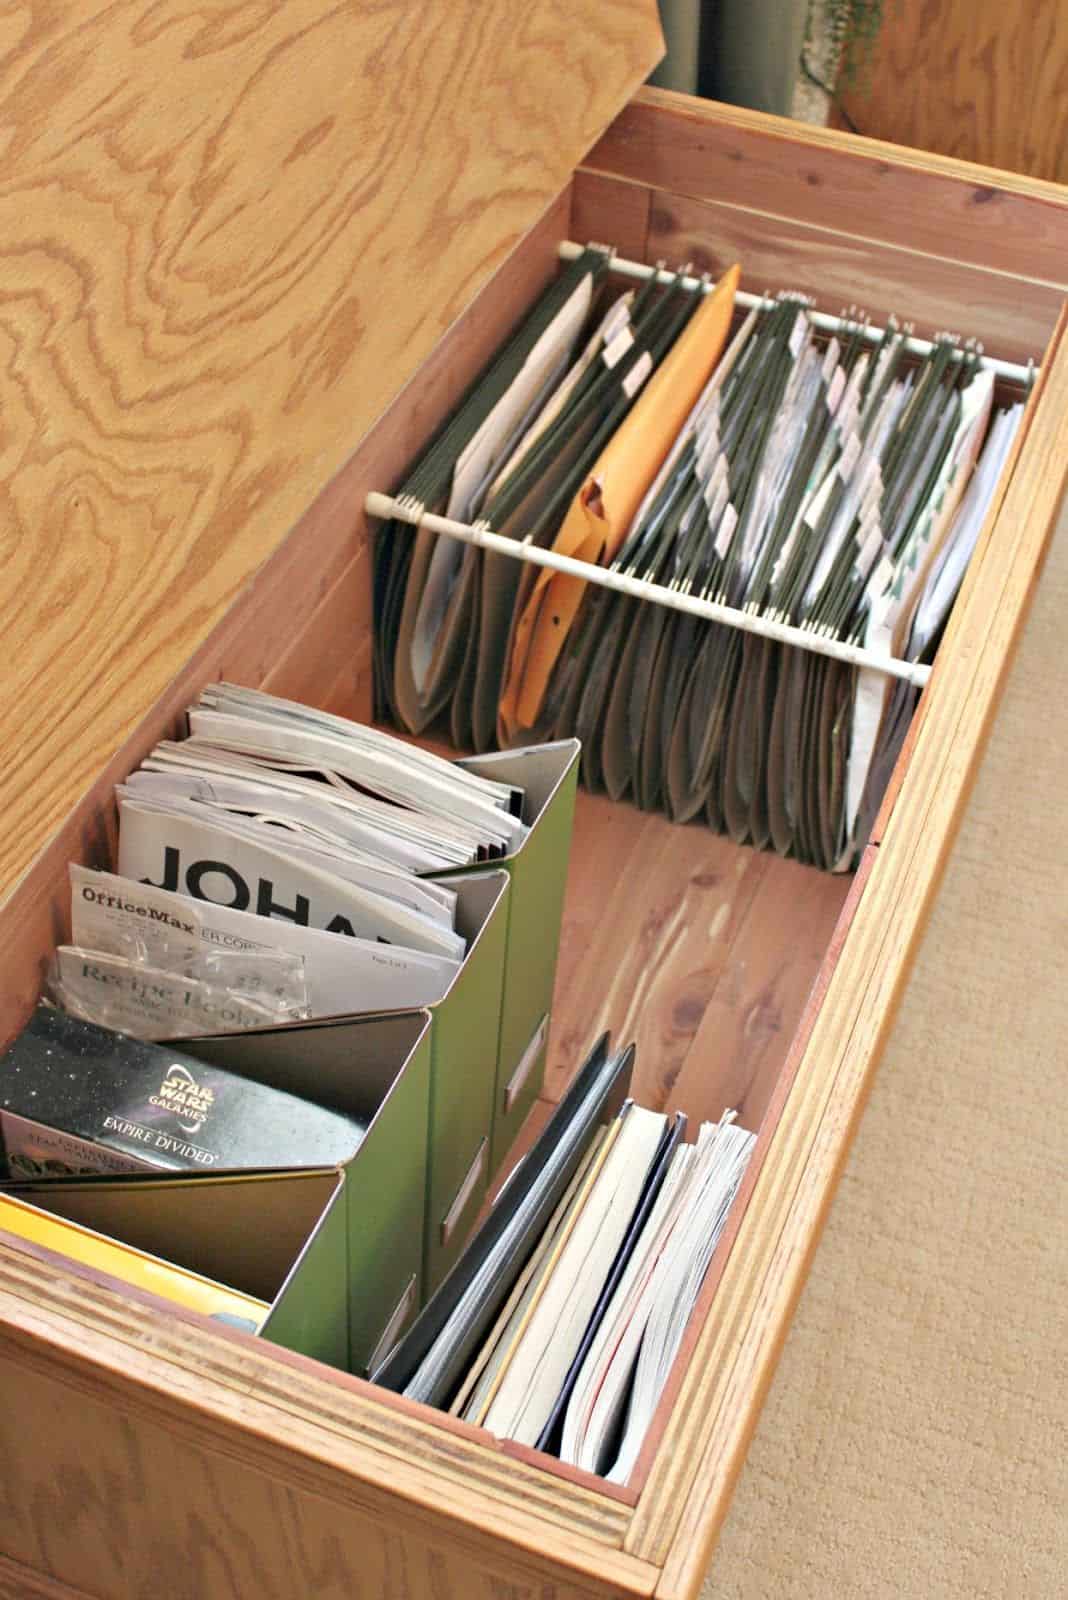 Use tension rods to create extra storage space inside cabinets